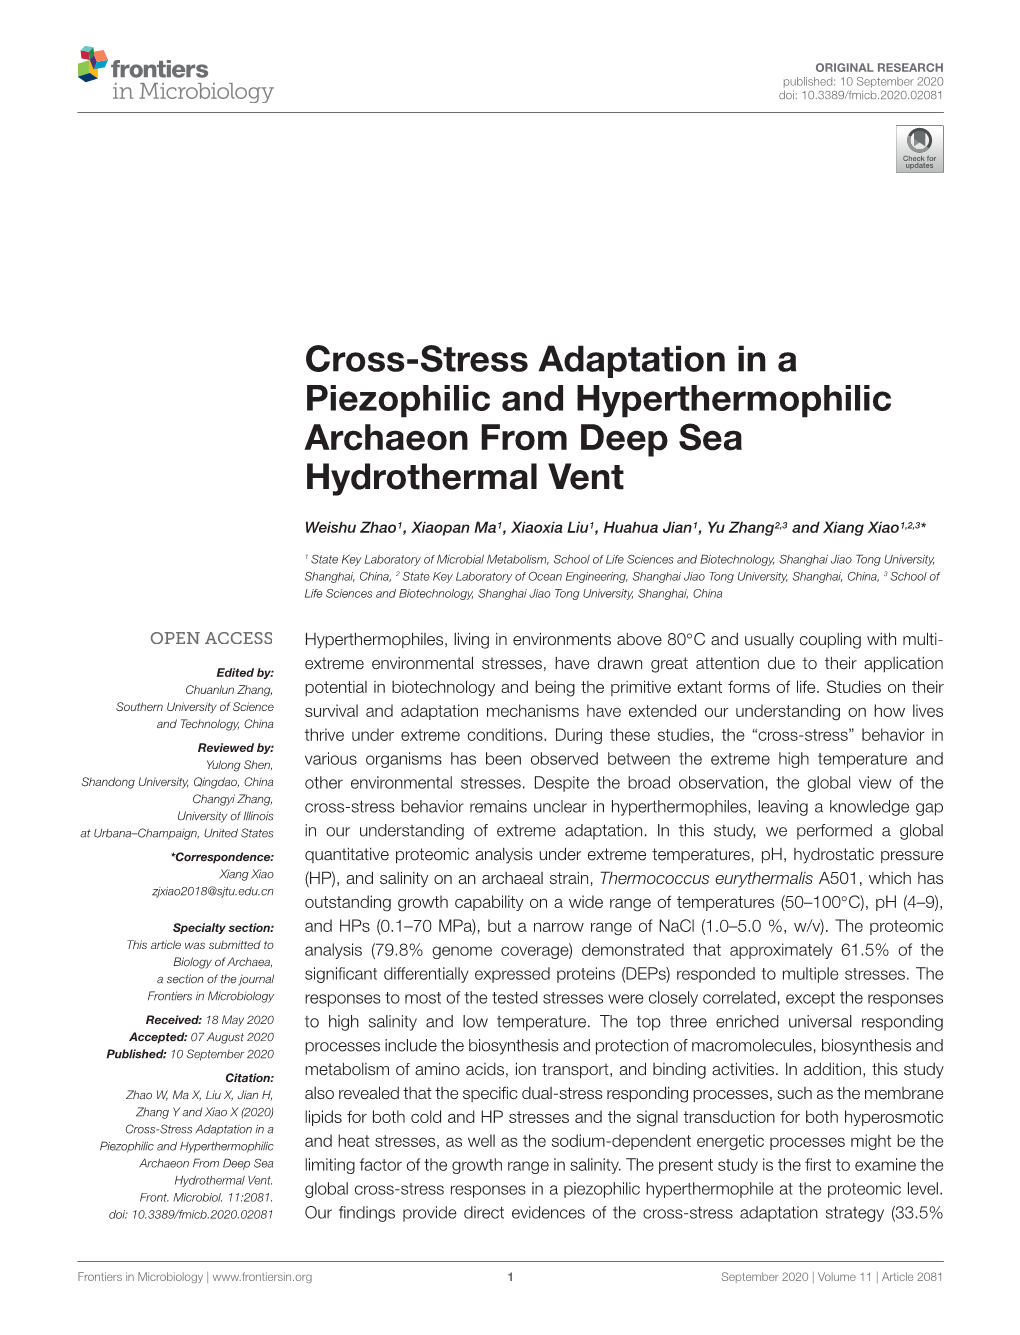 Cross-Stress Adaptation in a Piezophilic and Hyperthermophilic Archaeon from Deep Sea Hydrothermal Vent